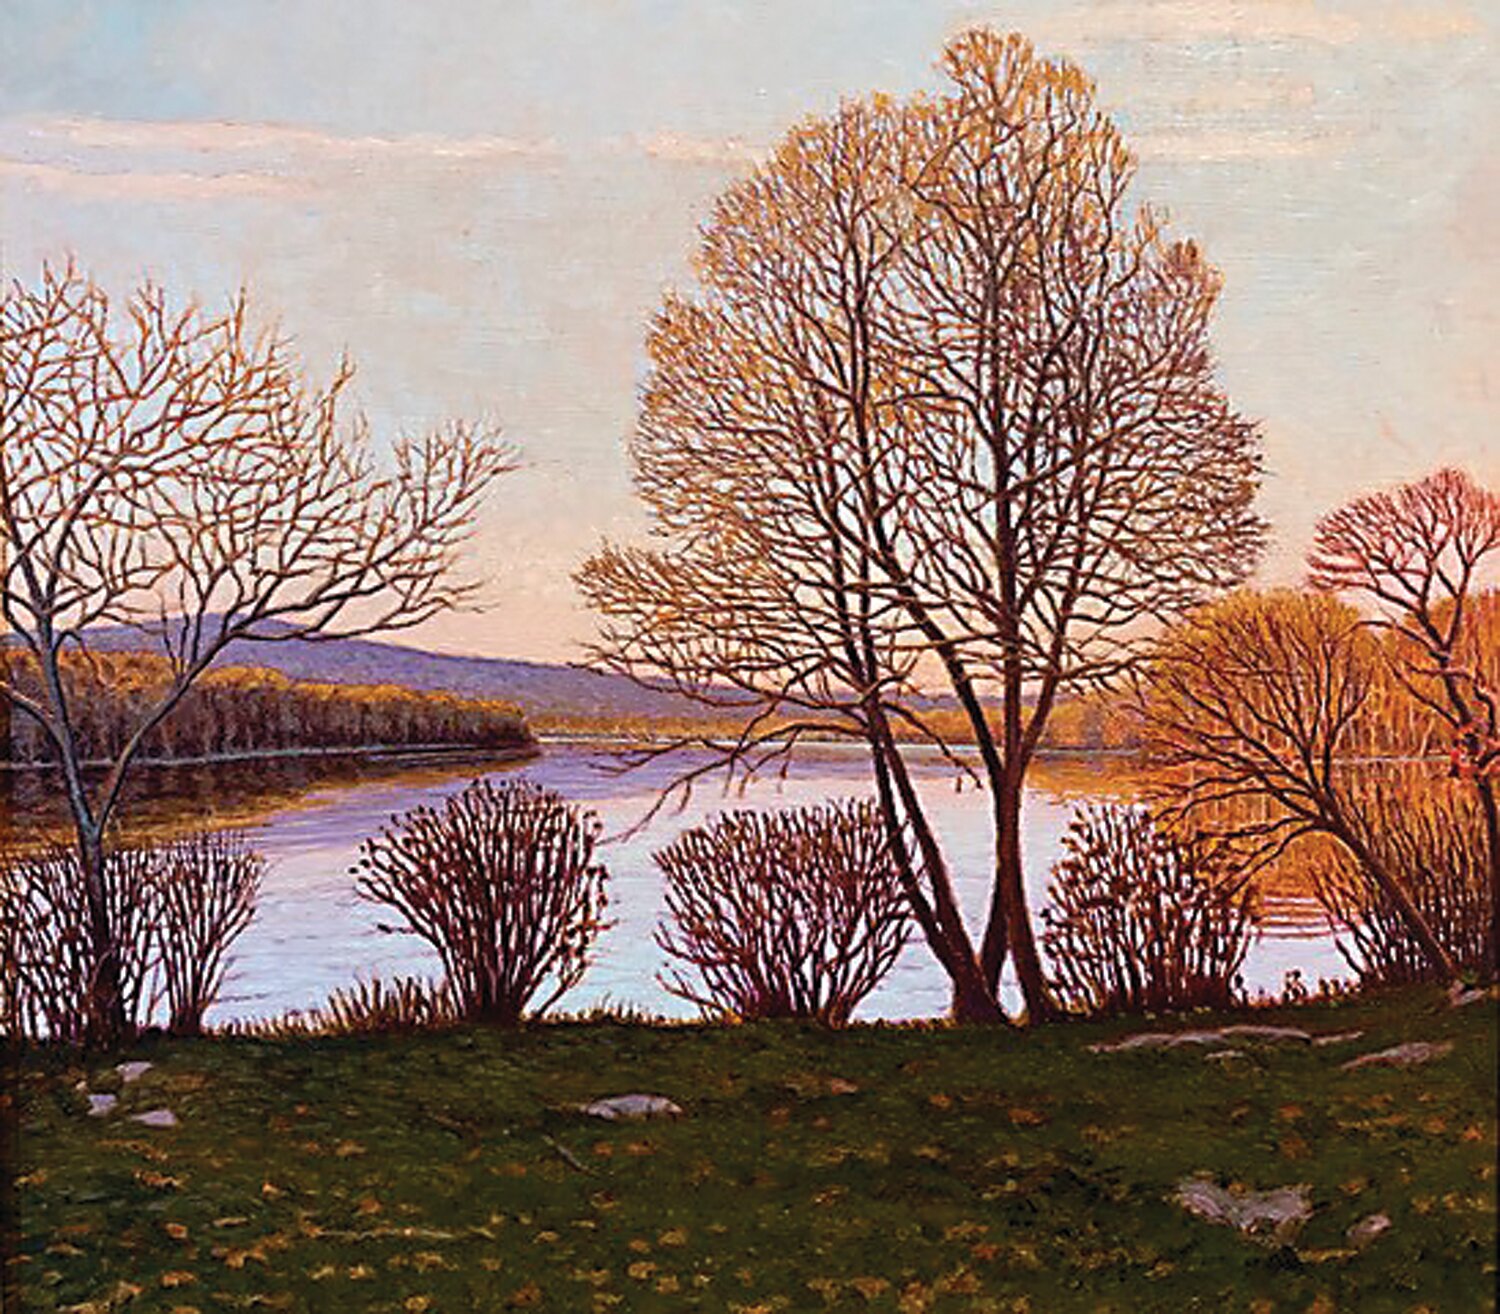 Early Evening Light, Lake Nockamixon, is a 21” x 23” oil painting by Dean F. Thomas.